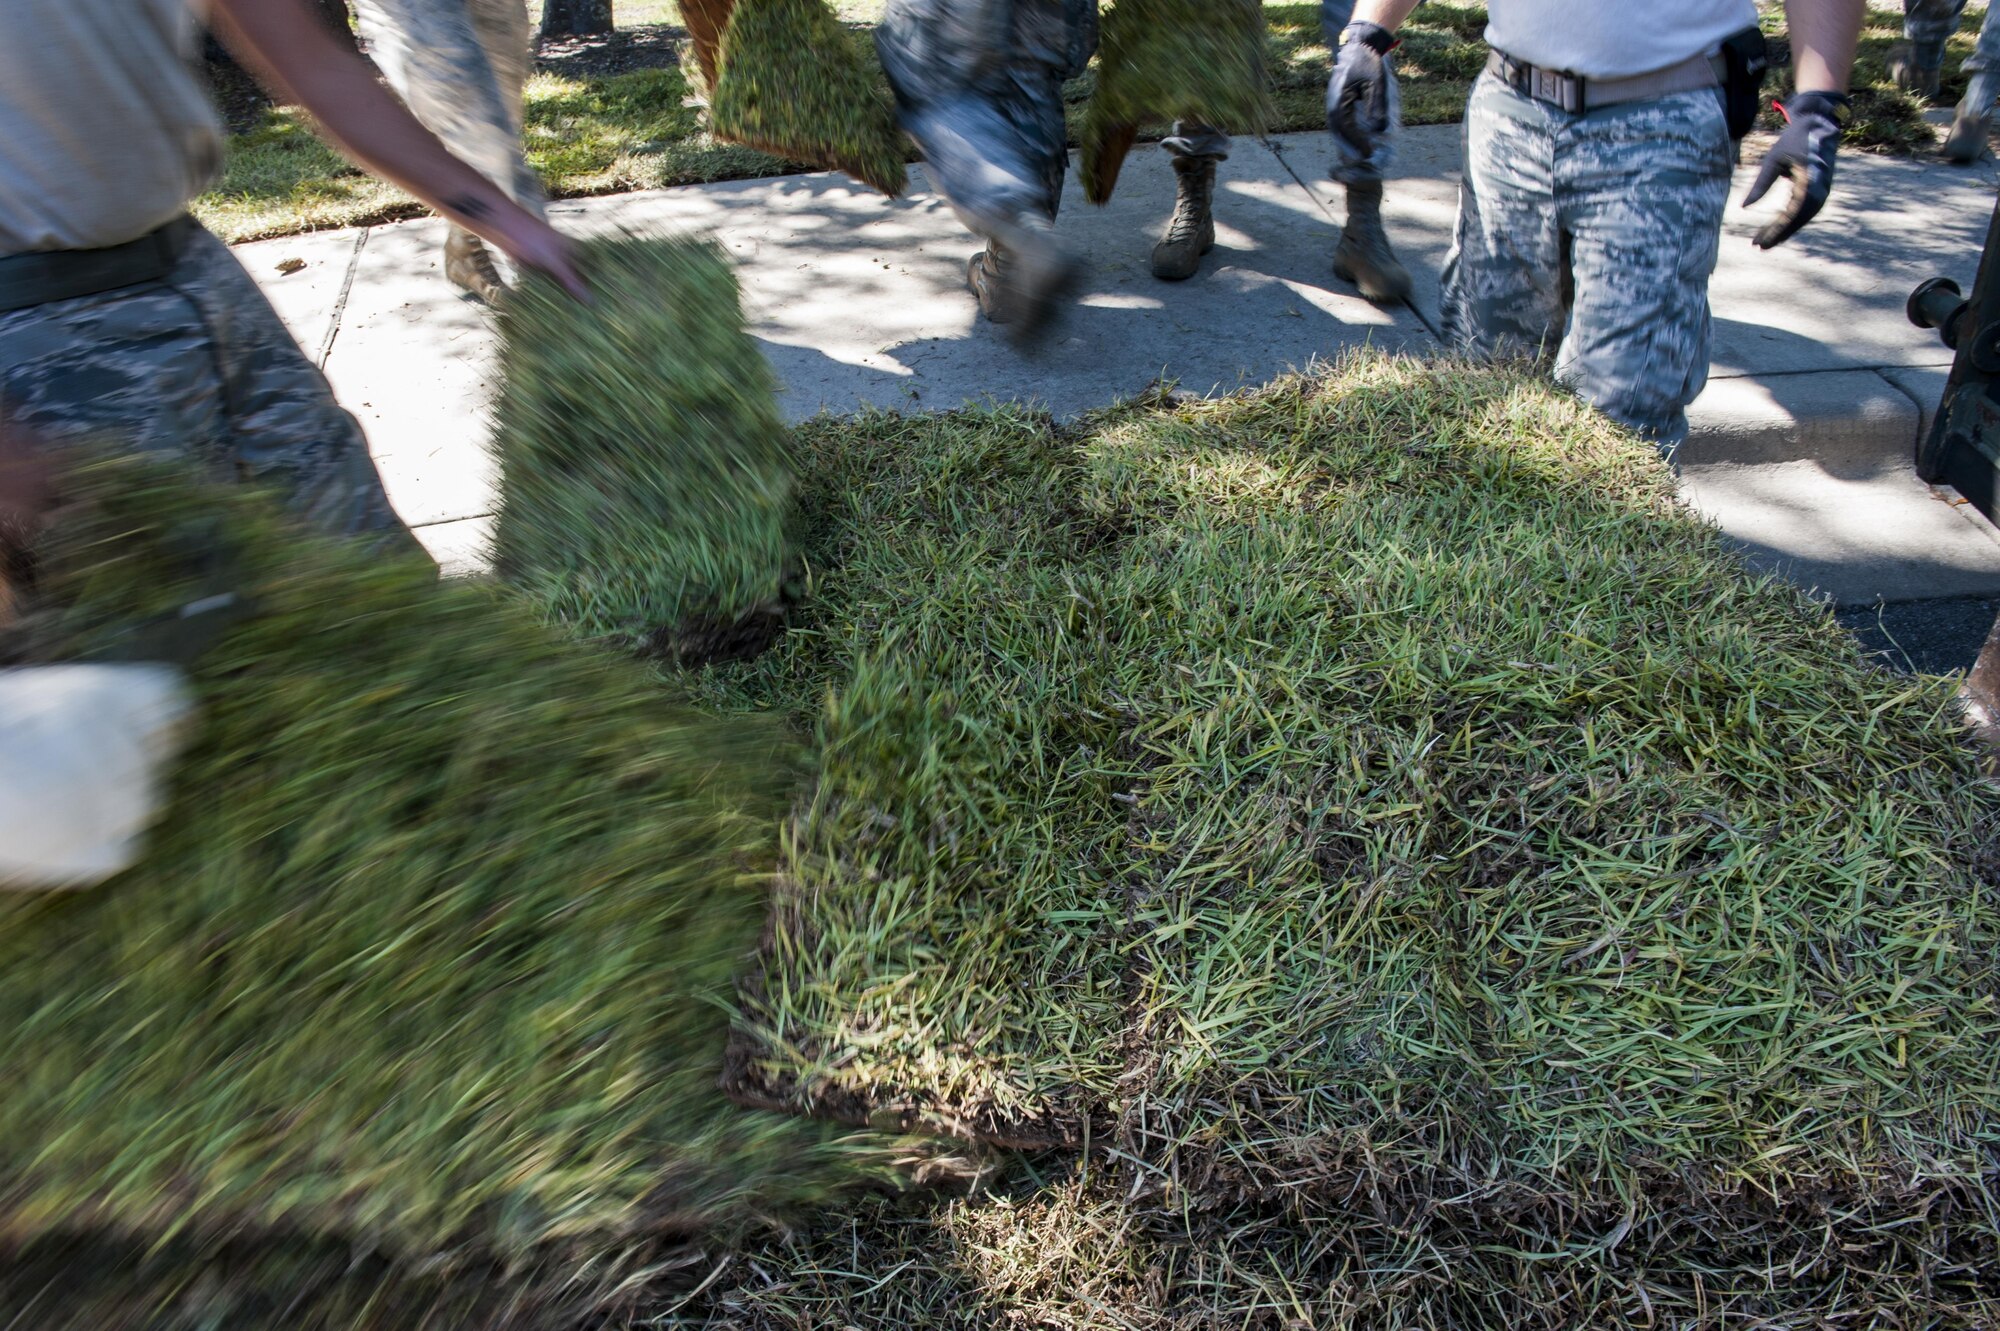 Airmen with the 1st Special Operations Civil Engineer Squadron lay sod at Hurlburt Field, Fla., Oct. 4, 2016. Civil engineer Airmen laid 34 pallets of sod outside the Soundside Club to replace dead grass. (U.S. Air Force photo by Airman 1st Class Joseph Pick)